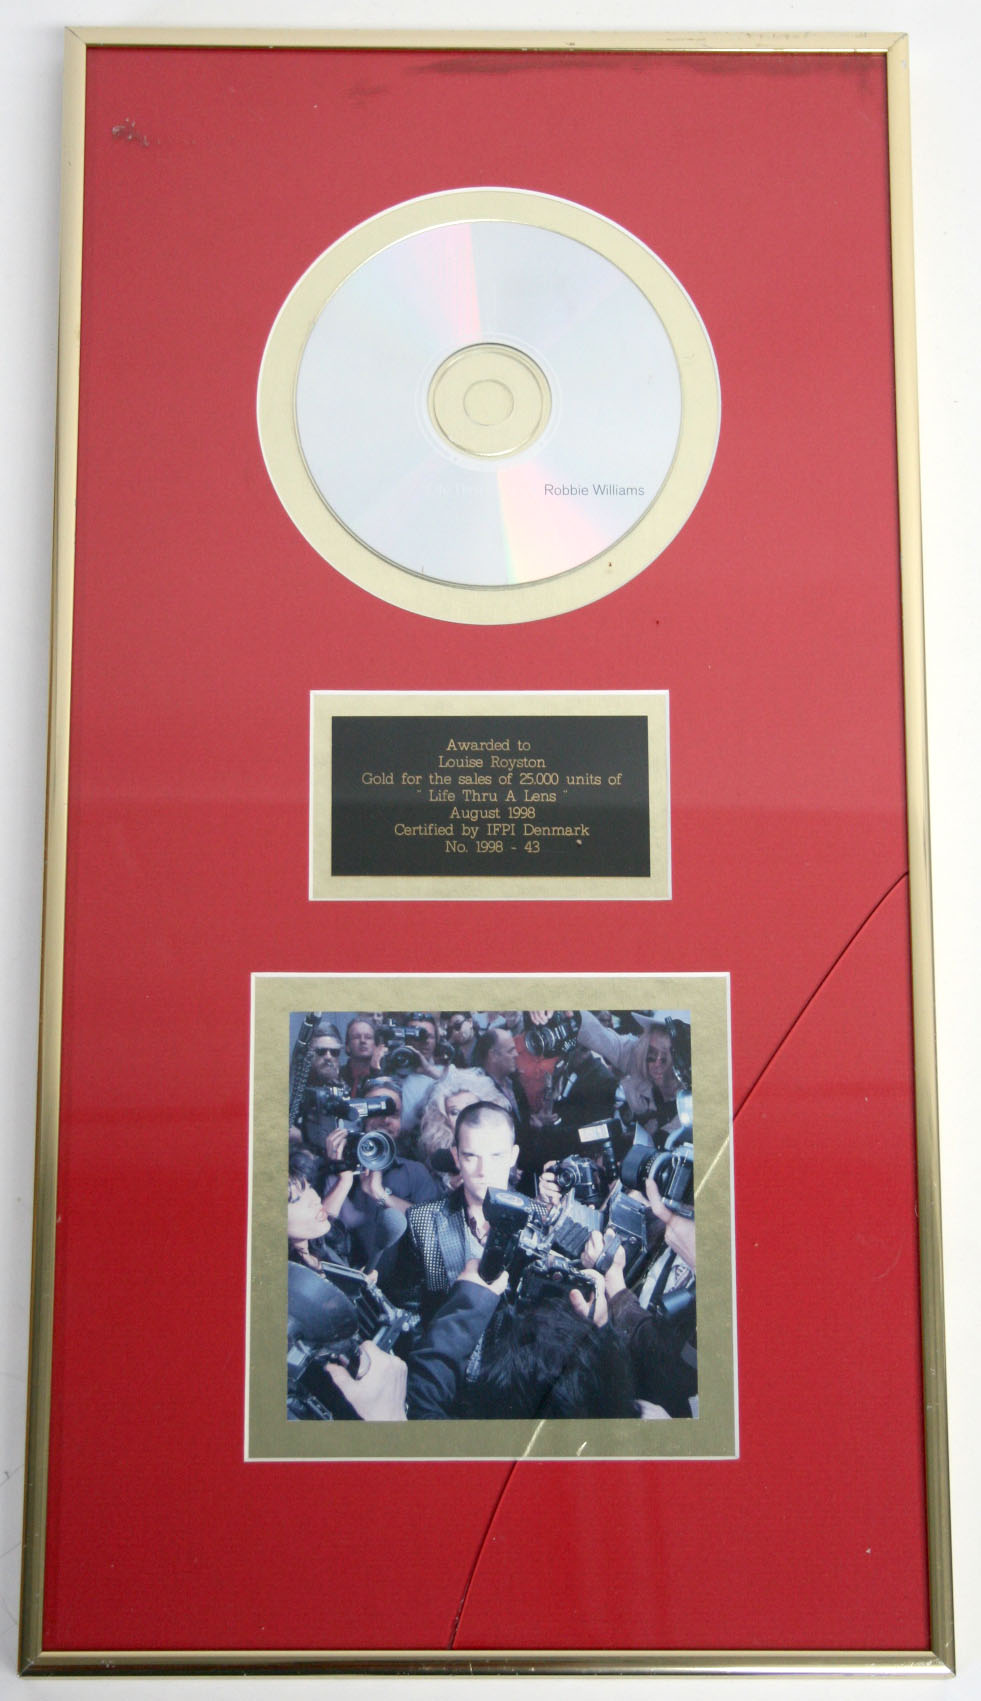 Robbie Williams "Life Thru A Lens" Gold Disc For 25,000 Units in Denmark, presented to Louise